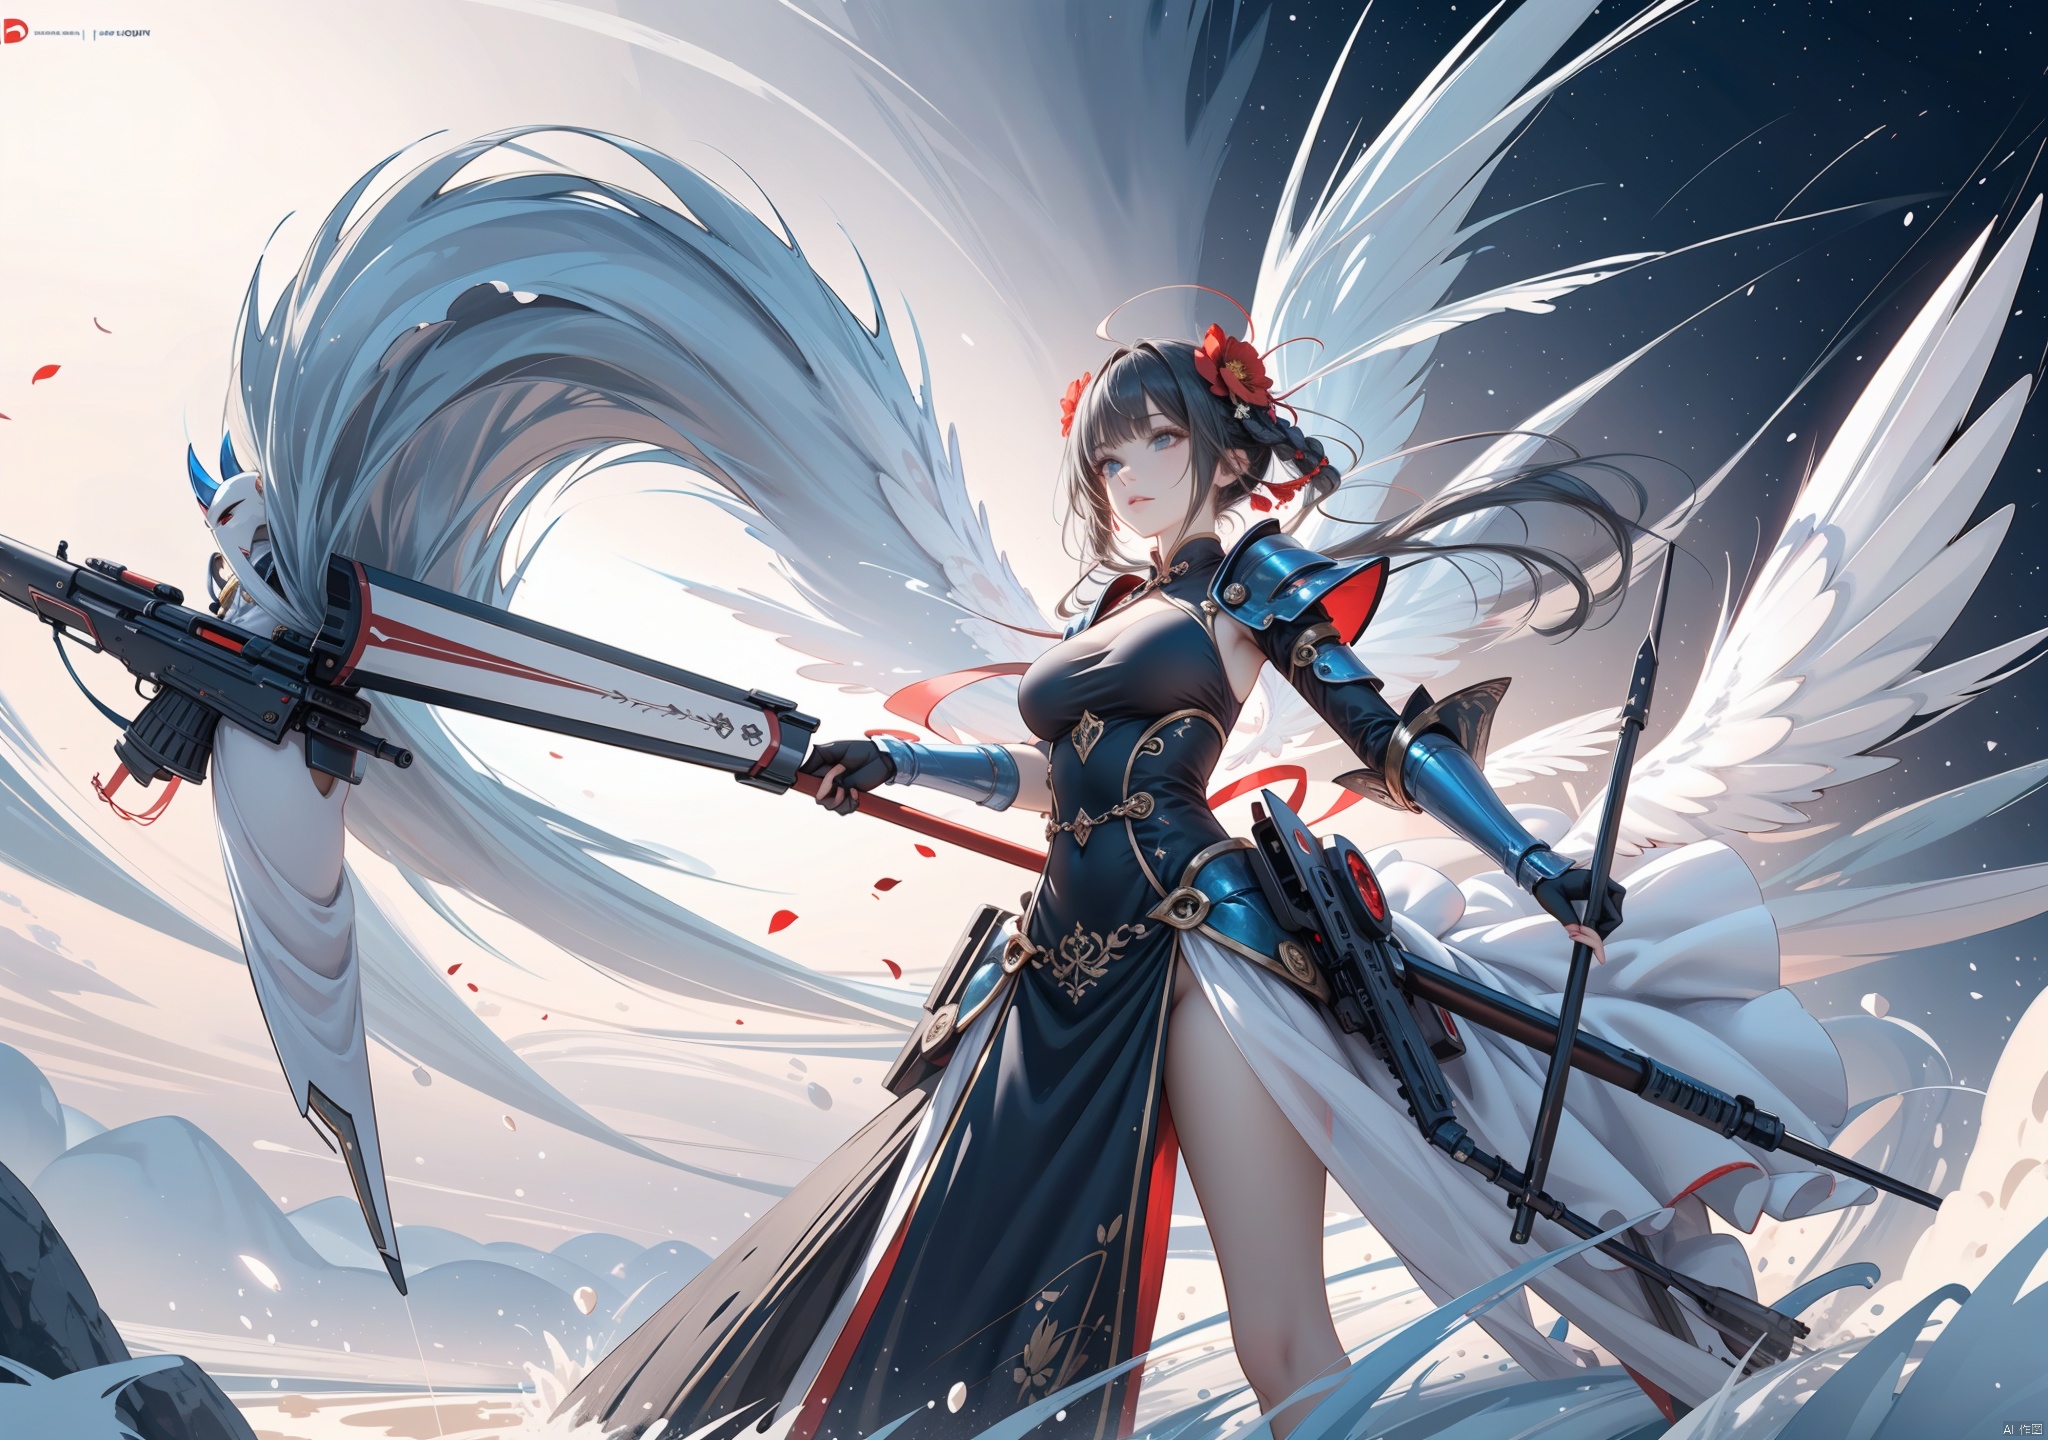  Surrounded by rotating transparent red scrolls, floating transparent red Chinese characters, dynamic, rotating, 1 girl standing in the air, not looking at the camera, writing calligraphy, solo, blue eyes, holding, weapon, holding weapon, glow, robot, mecha, science fiction, open_hand,movie lighting, strong contrast, high level of detail, best quality, masterpiece,heigirl,crystal_dress , crystal , wings,guijian, flowing skirts,（smoke）,Giant flowers, tattoo, mask, greendesign, Ink painting, Hourglass body shape, lora_eyes10